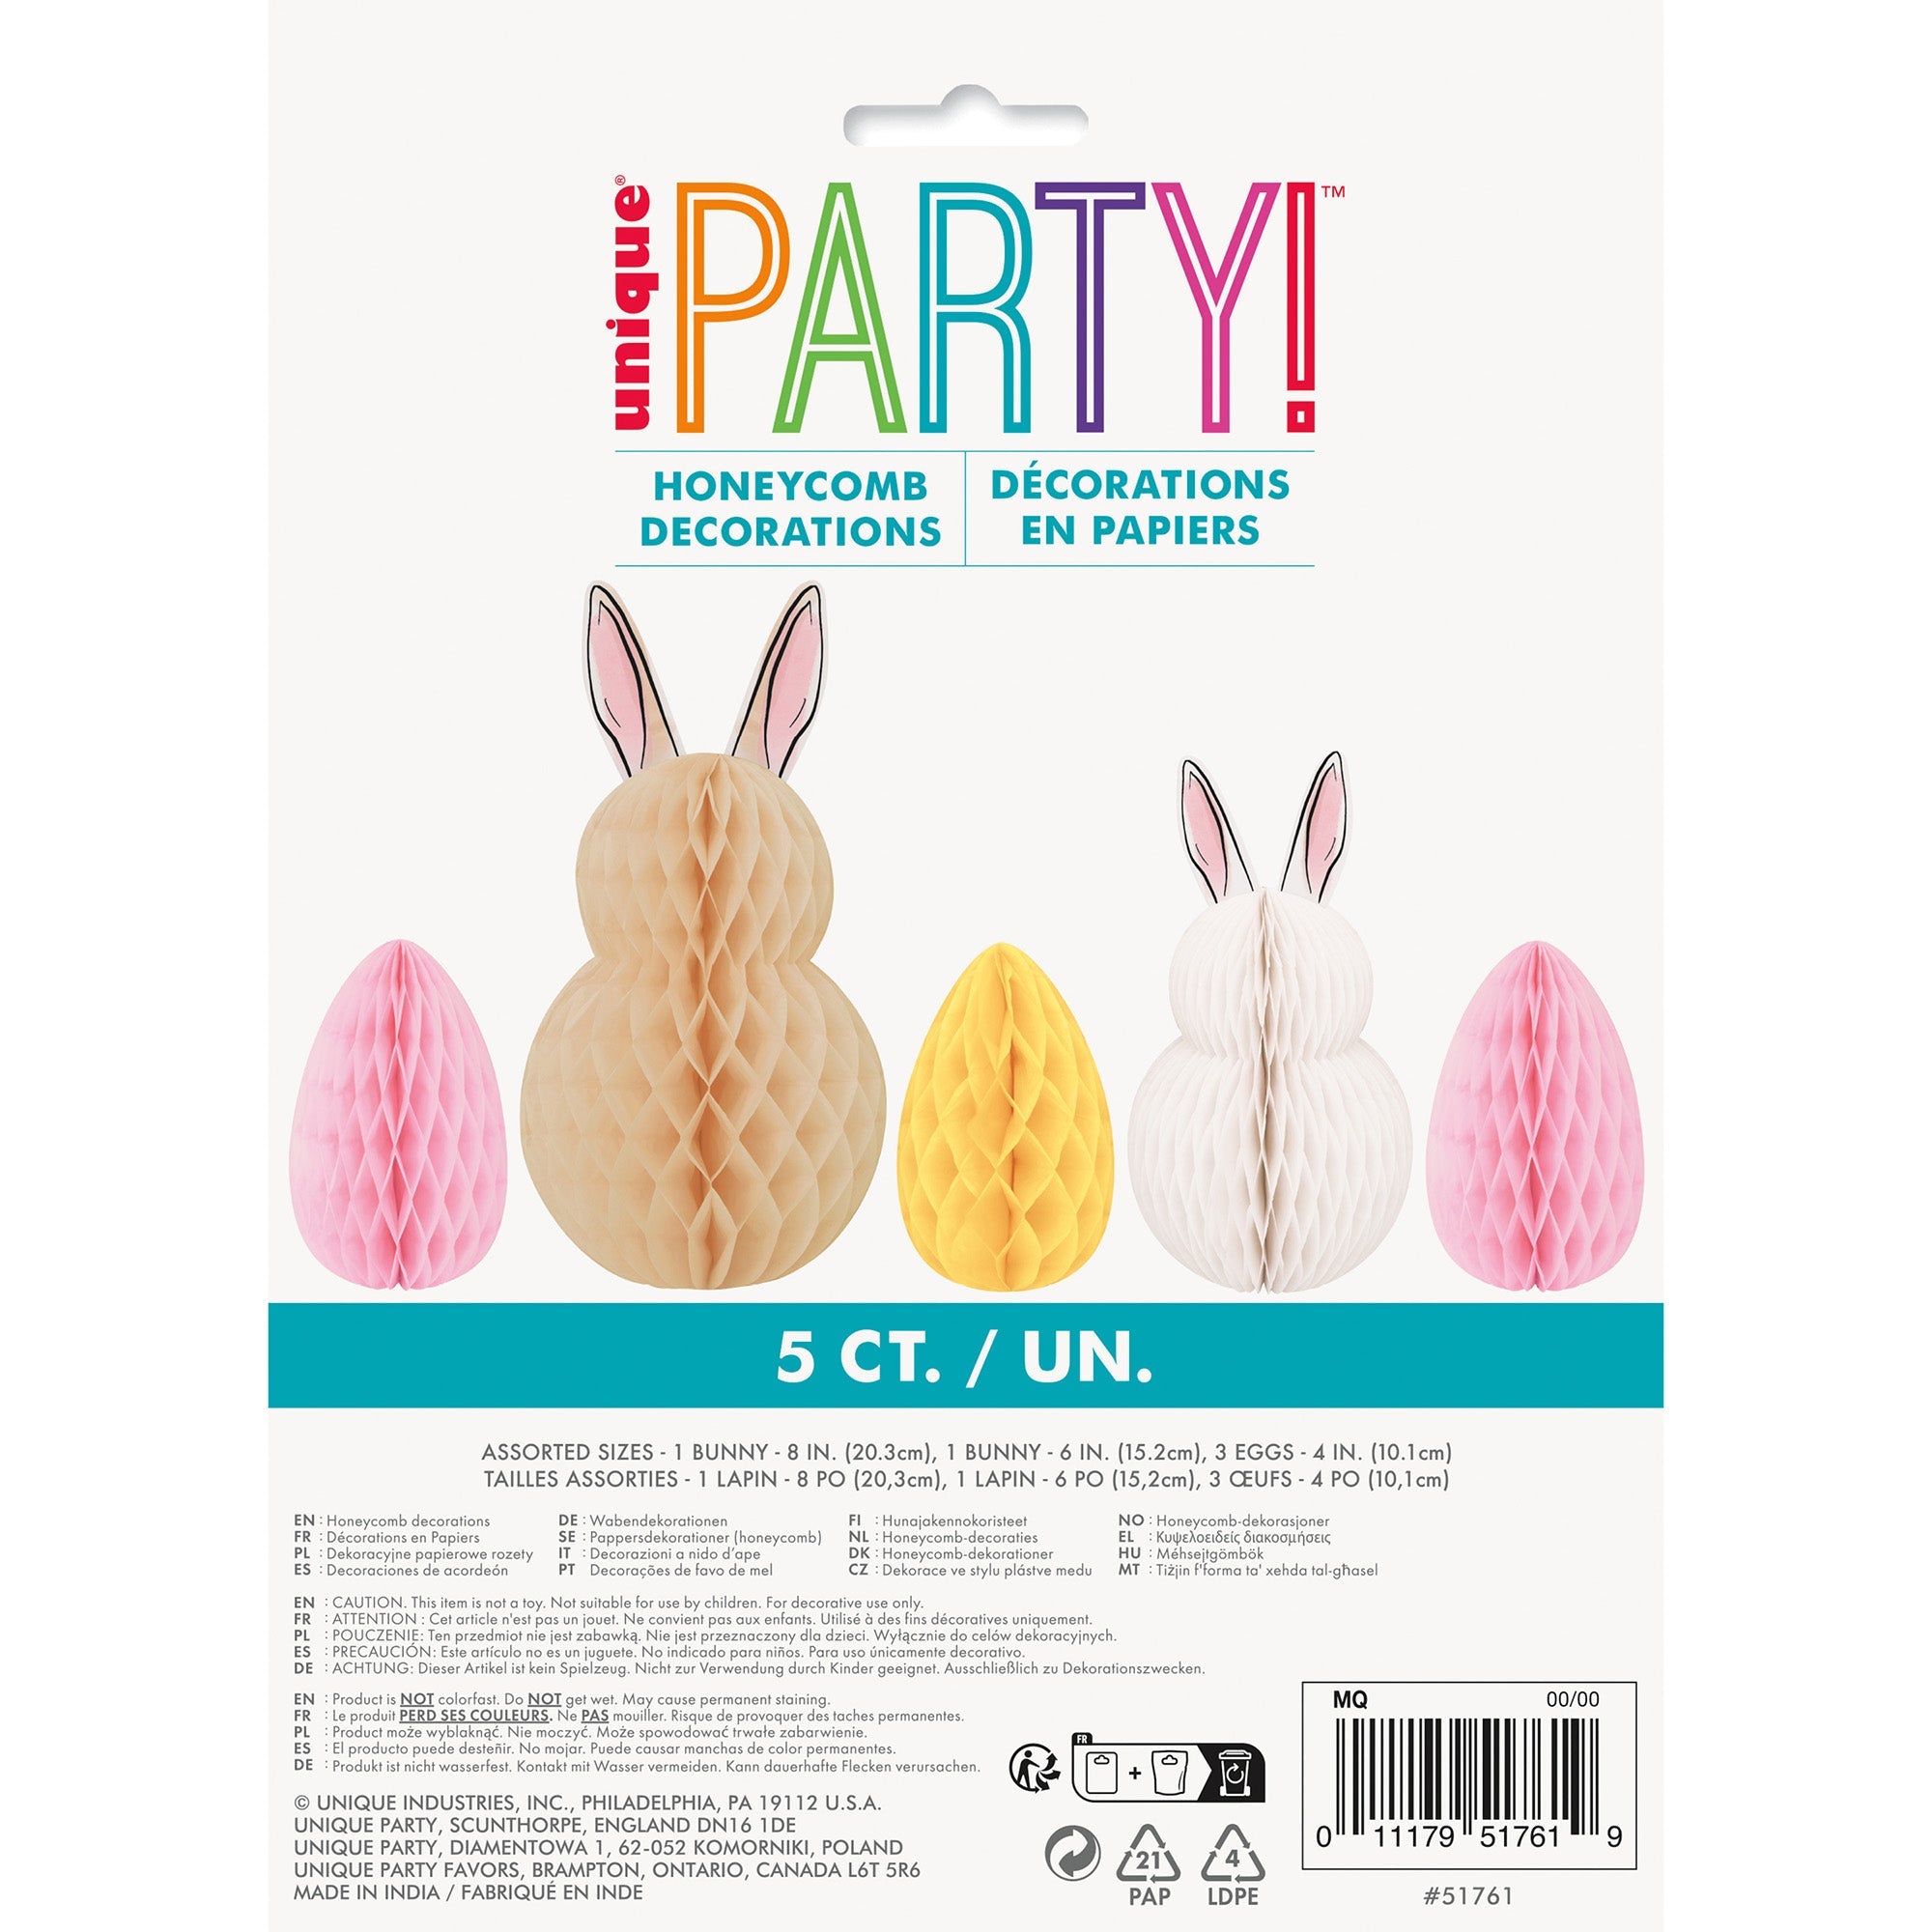 Egg-stra Accents 5 Bunny and Easter Egg Honeycomb Centerpiece Decorations